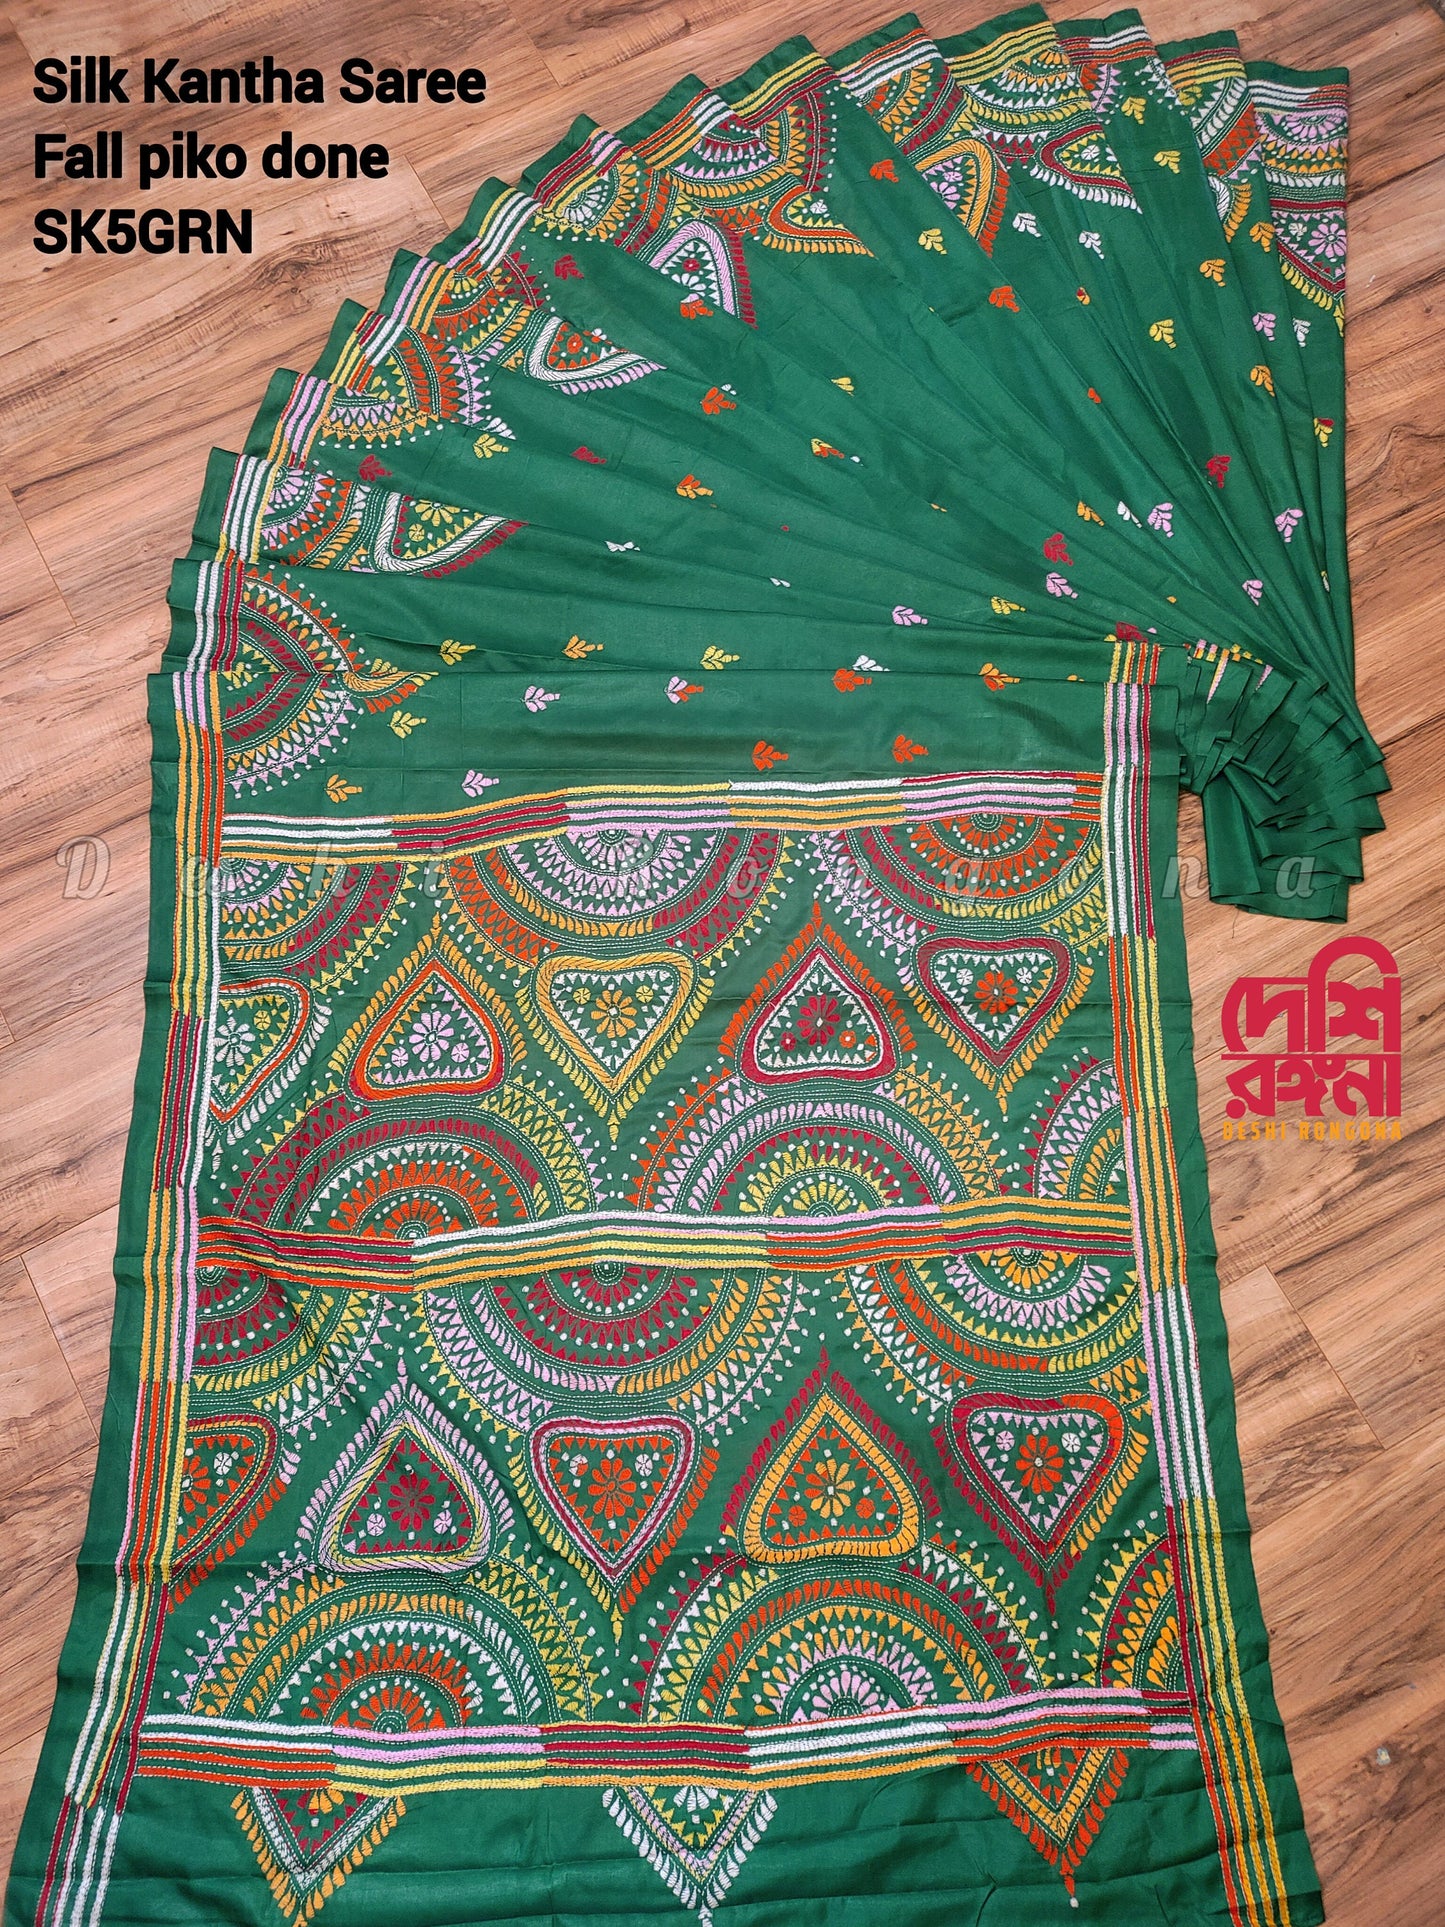 Extraordinary Hand Stiched Kantha Saree, Green Bangalore Silk with Multi color Kantha Works, Fall piko done, Blouse PC, Elegant,Classy Saree